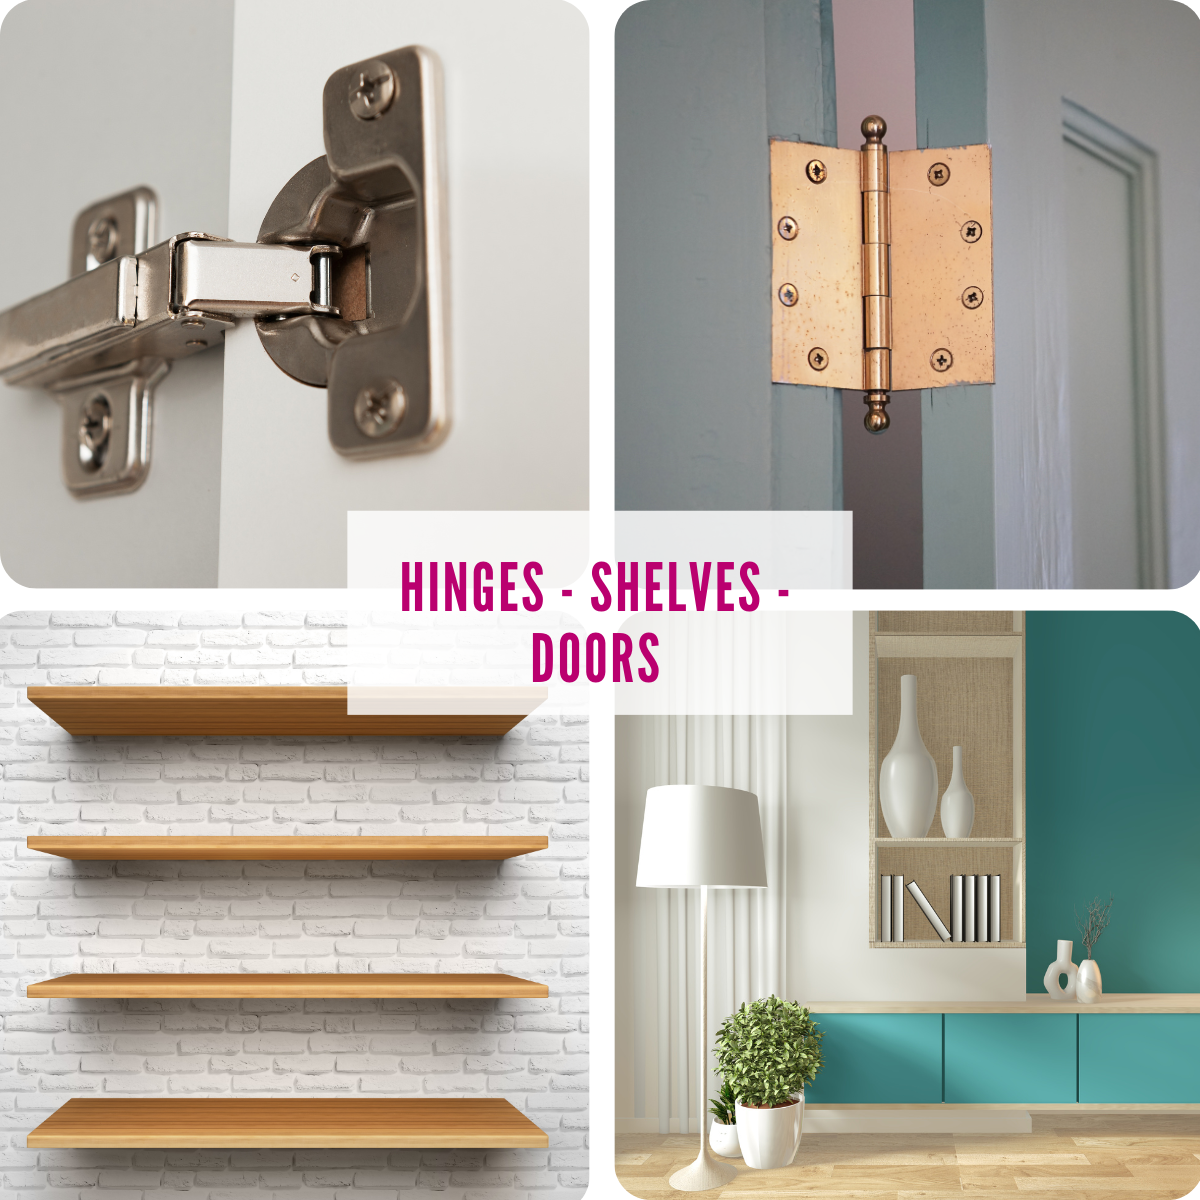 Hinges for Doors and Cabinets; Shelving (Kitchen, Laundry, Bathroom, Living Rooms, Bathrooms, etc.). Hire A Hubby Trinity Beach Brinsmead 1800 803 339